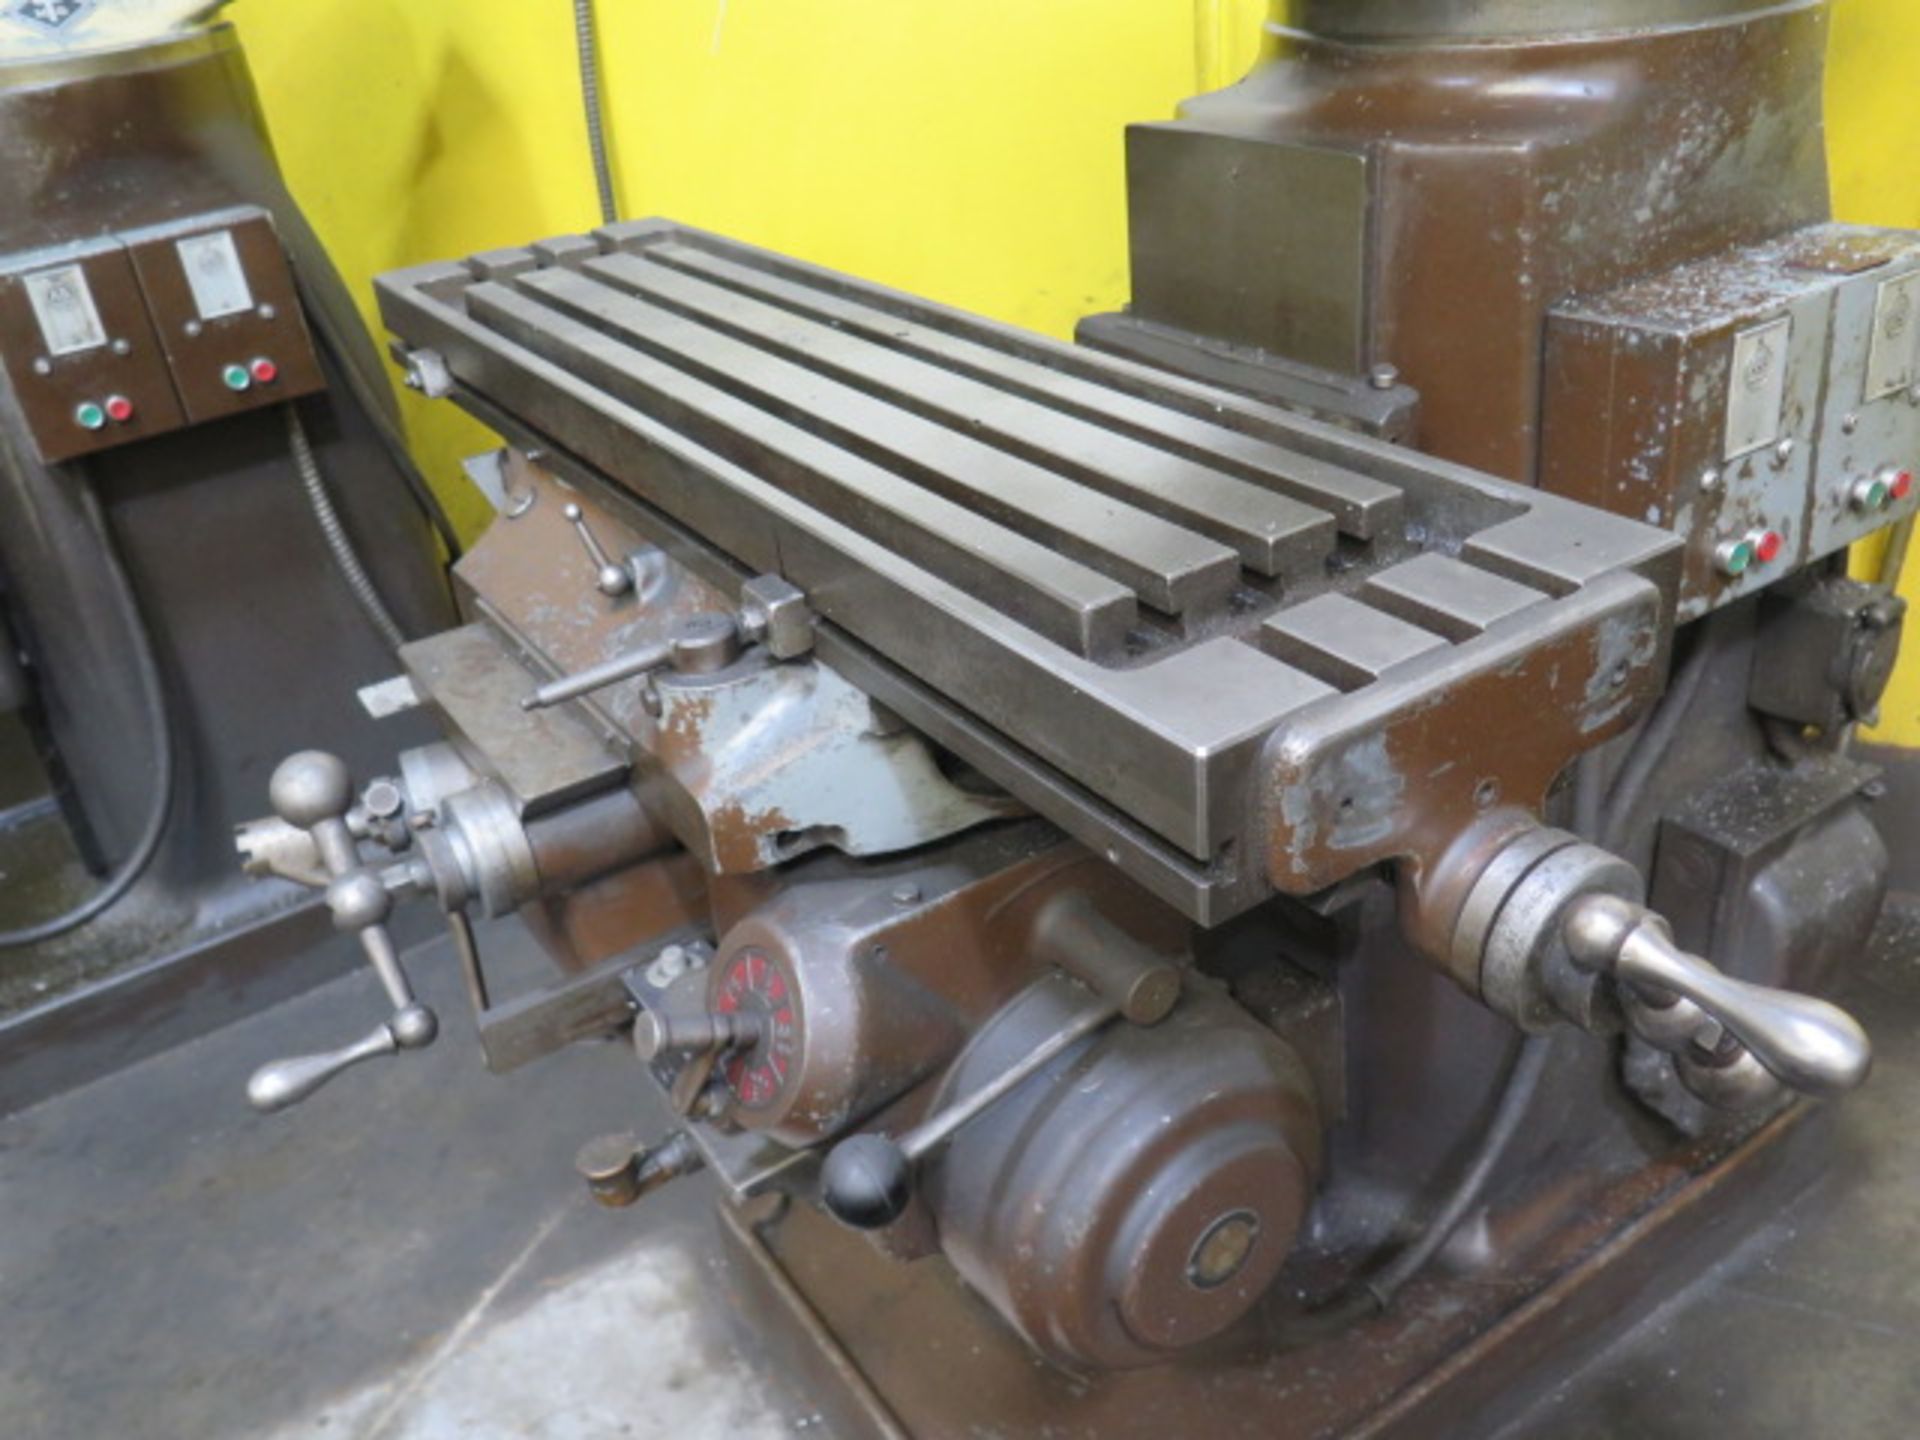 Tree 2UVR Vertical Mill s/n 7989 w/ 60-3300 RPM, Colleted Spindle, PF, 10 ½” x 42” Table, SOLD AS IS - Image 6 of 9